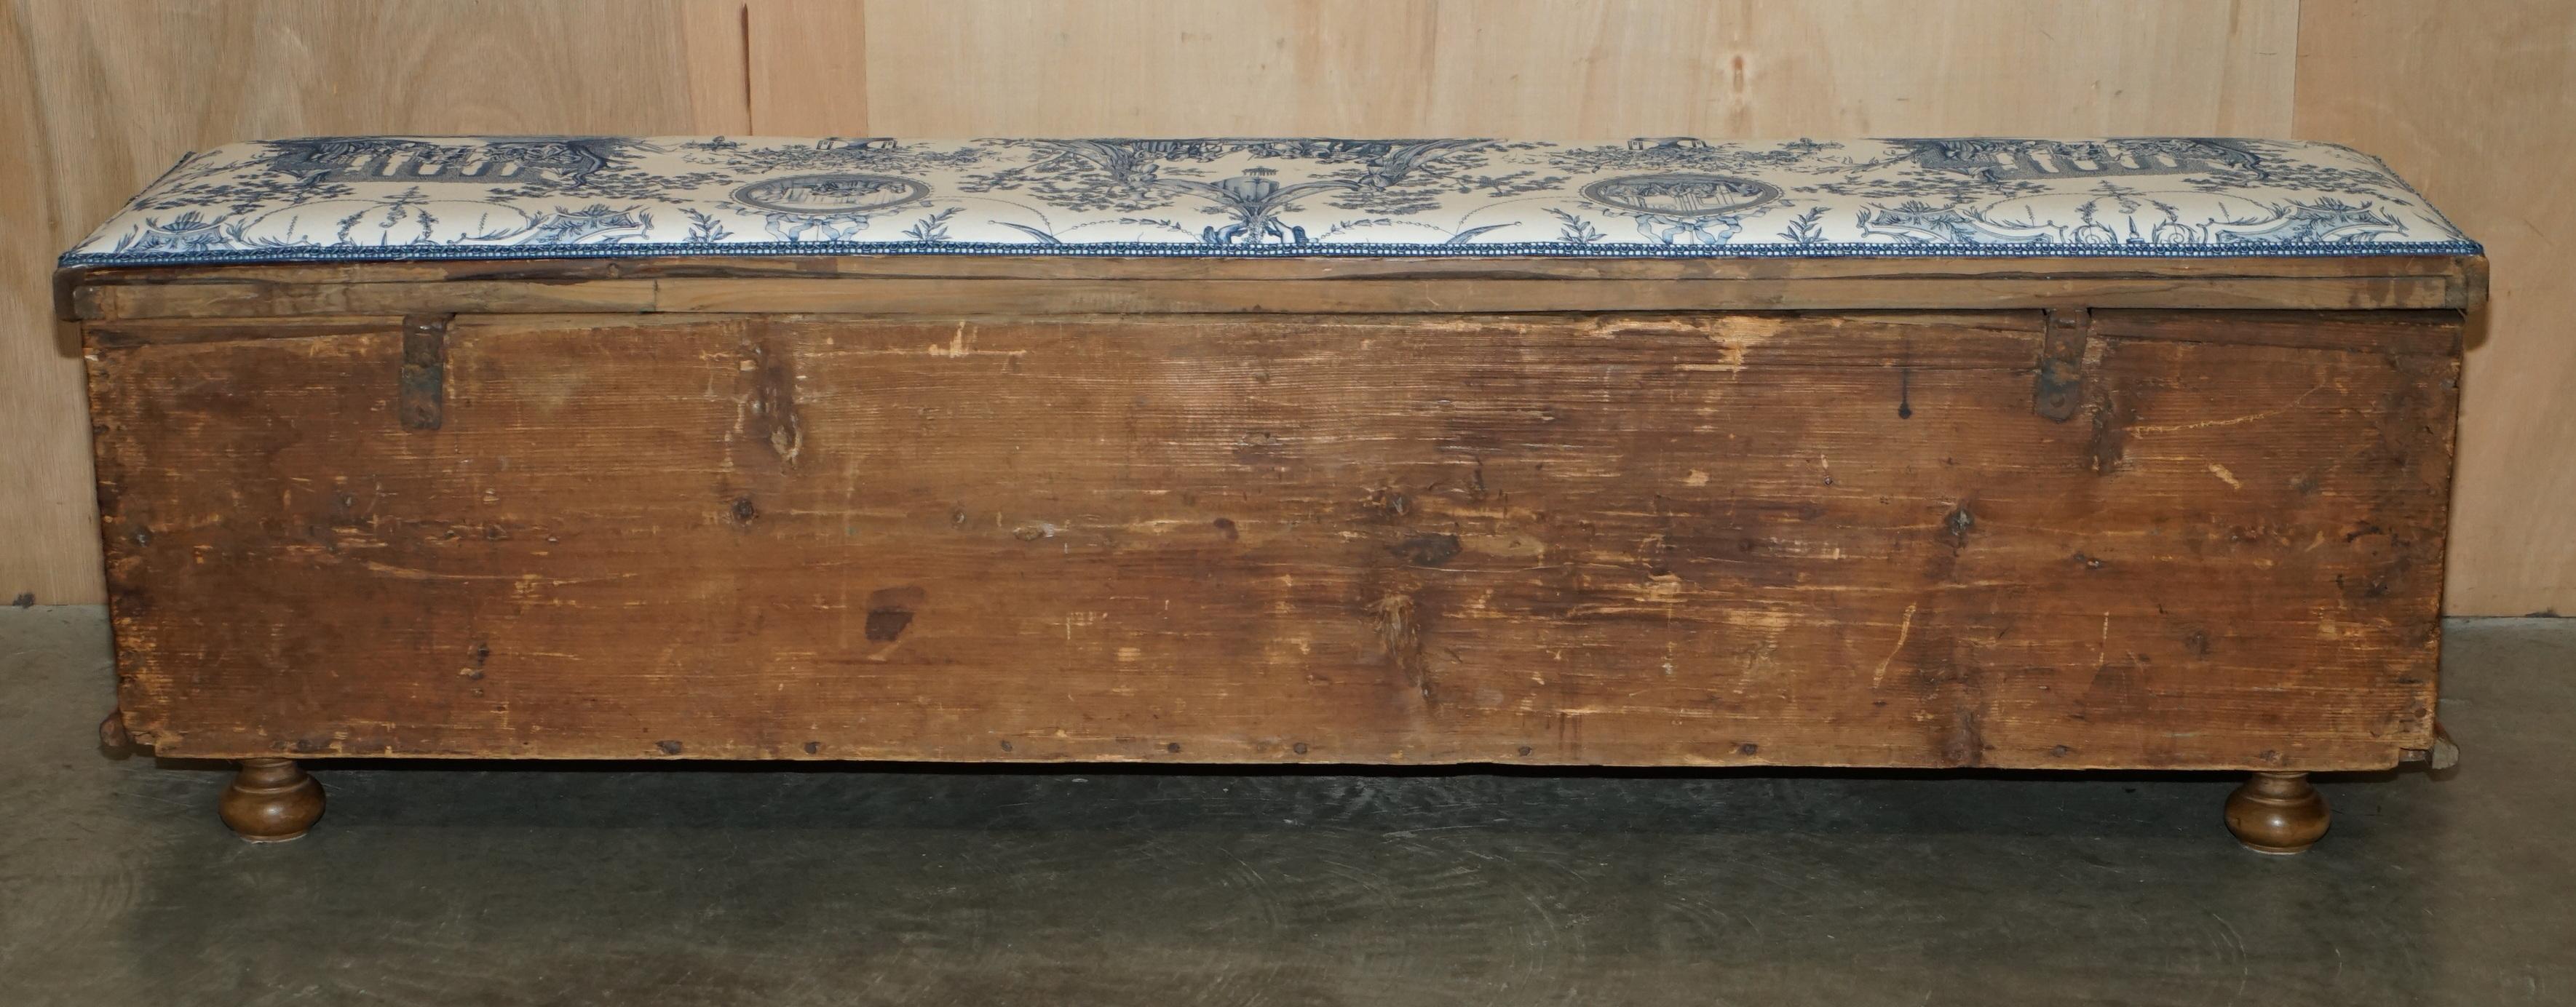 EXTRA LONG CIRCA 1840 HAND PAiNTED COFFER TRUNK CHEST USED AS HALL BENCH SEATING For Sale 5